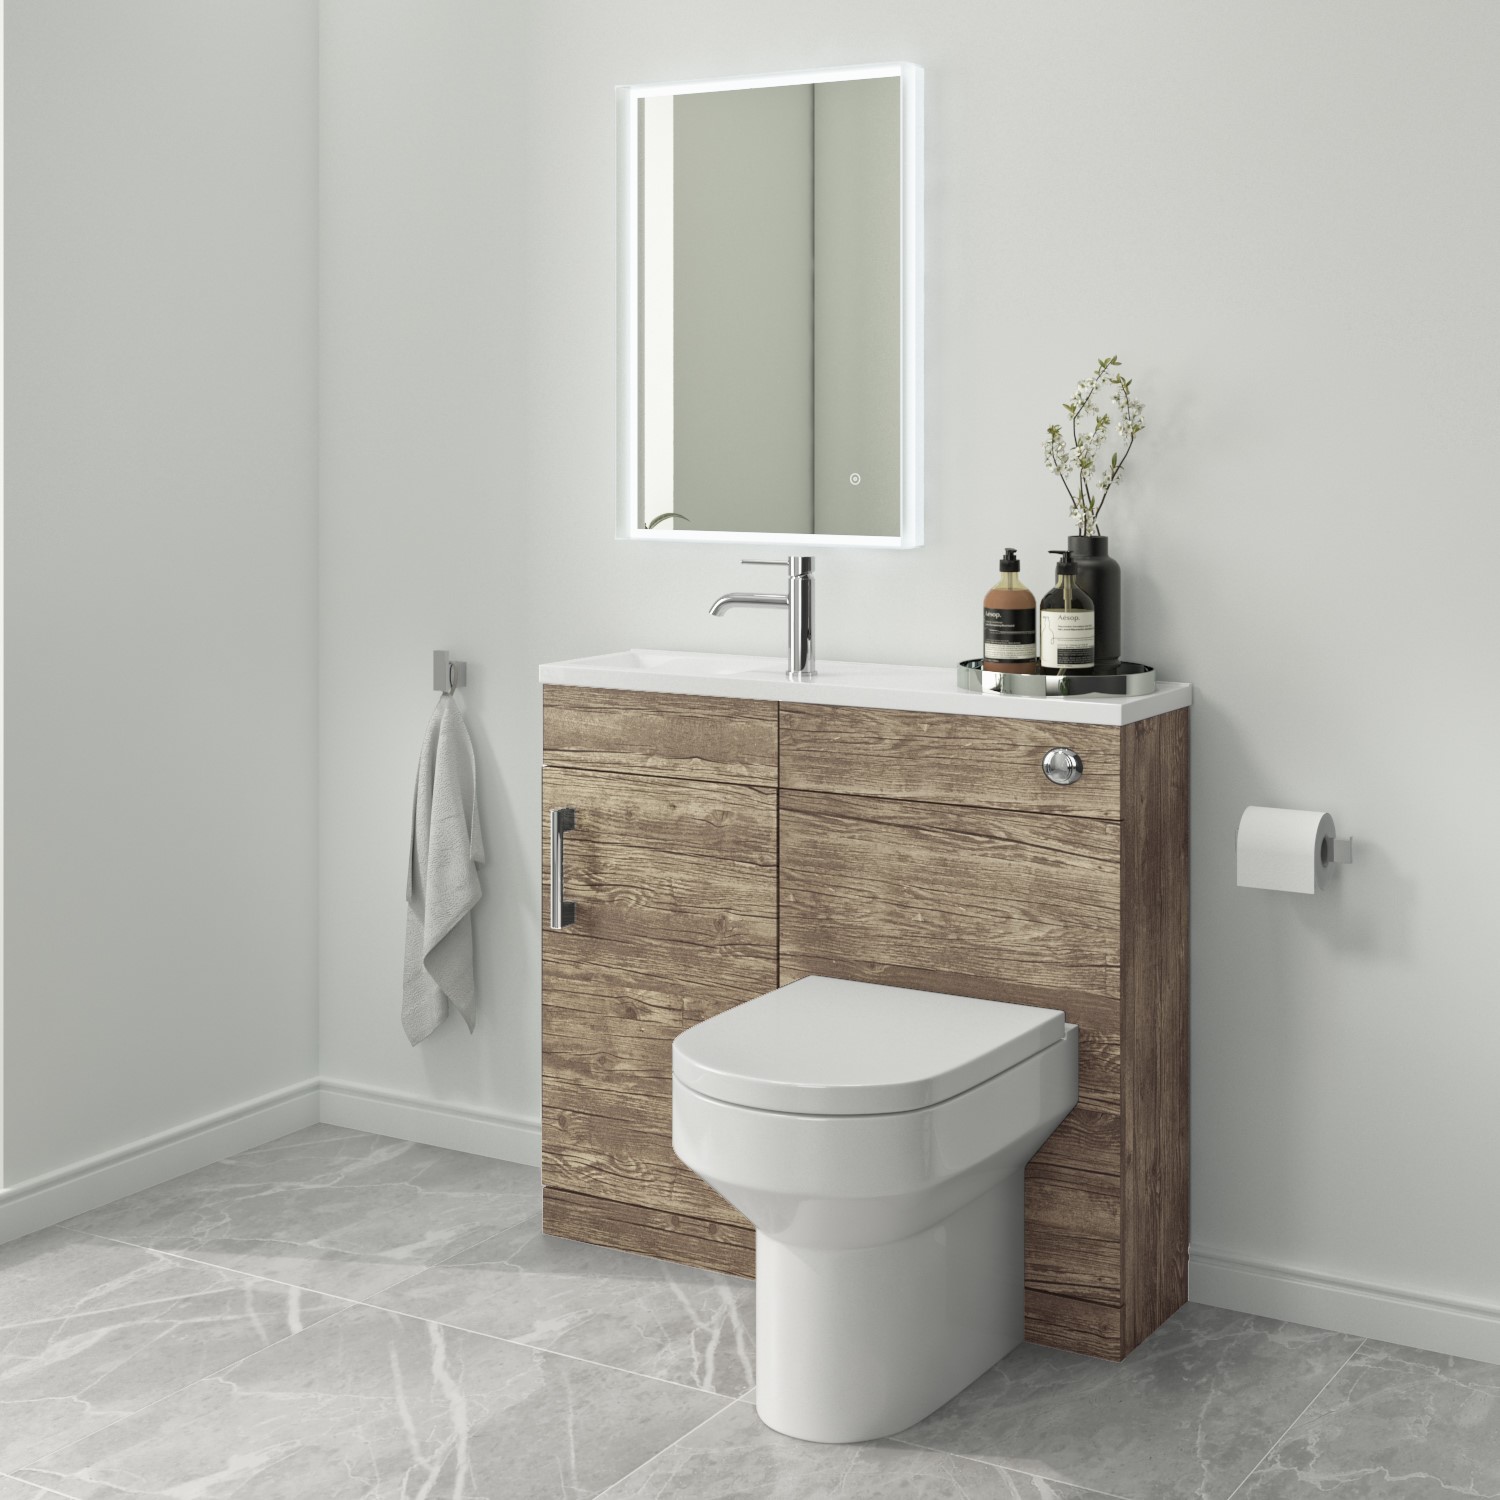 900mm Wood Effect Cloakroom Toilet and Sink Unit with Chrome Fittings - Ashford